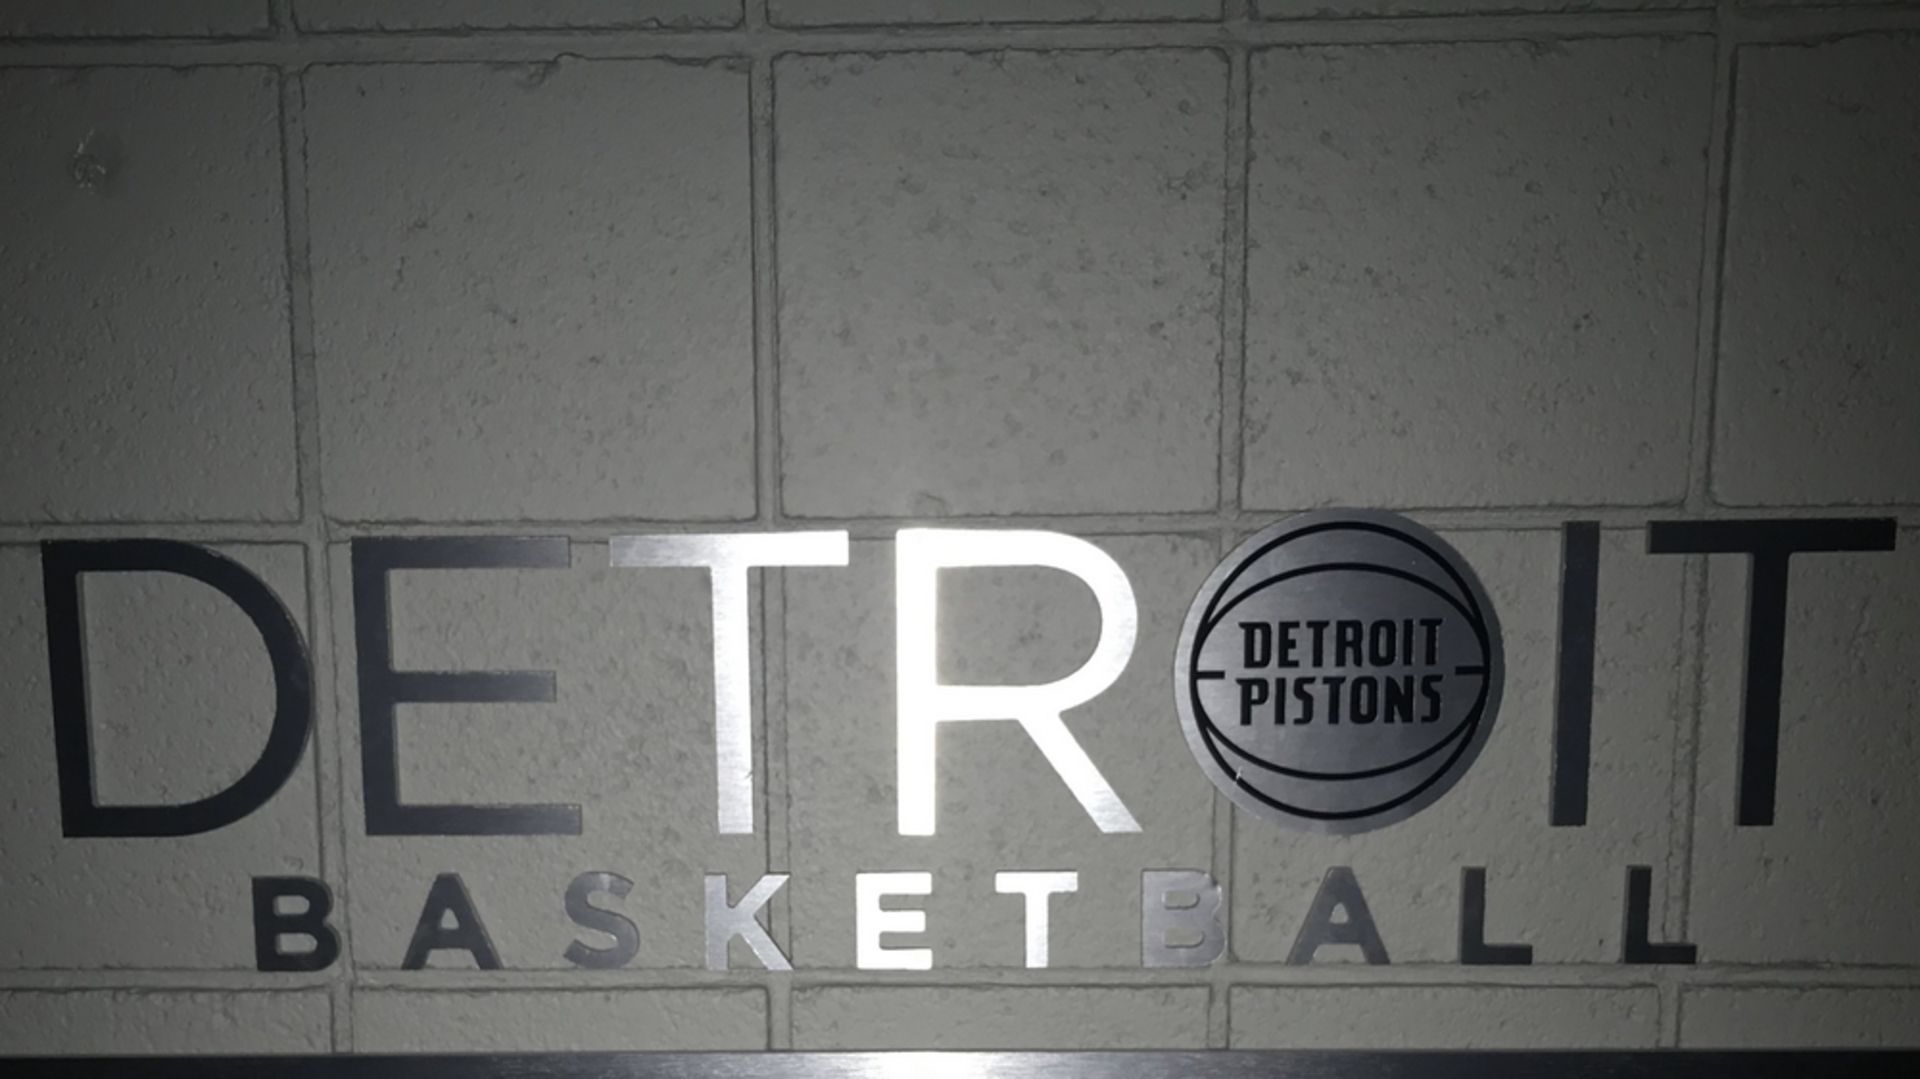 "Detroit Basketball" , Dim. 56 in x 14 in , Location: Officials Lockers Room ***Note from